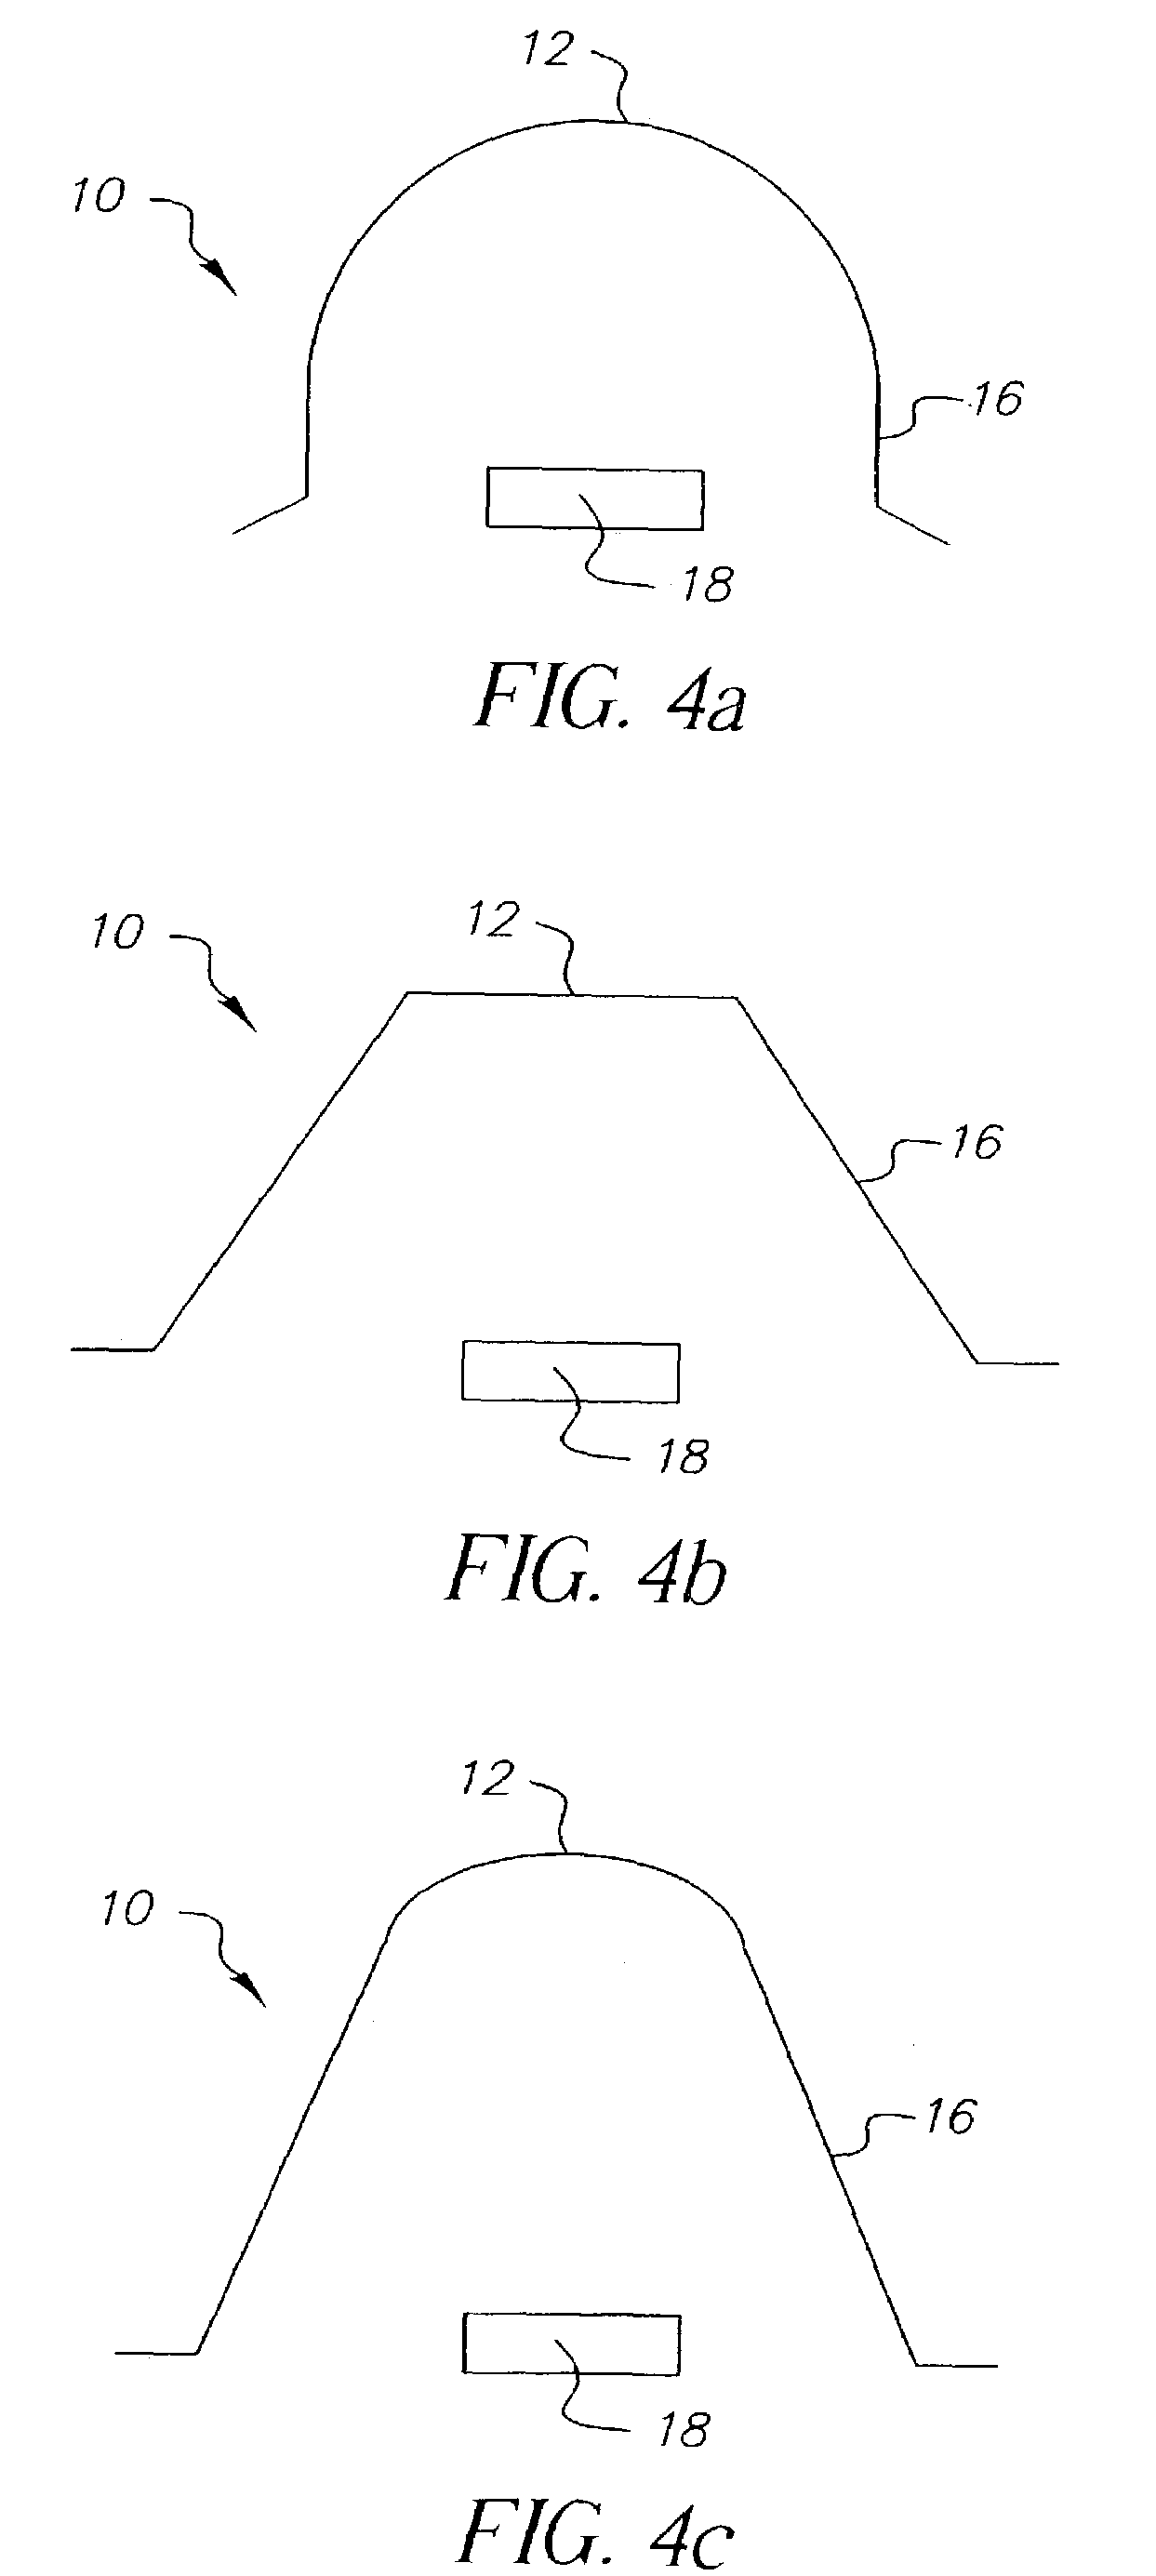 Immersive image viewing system and method